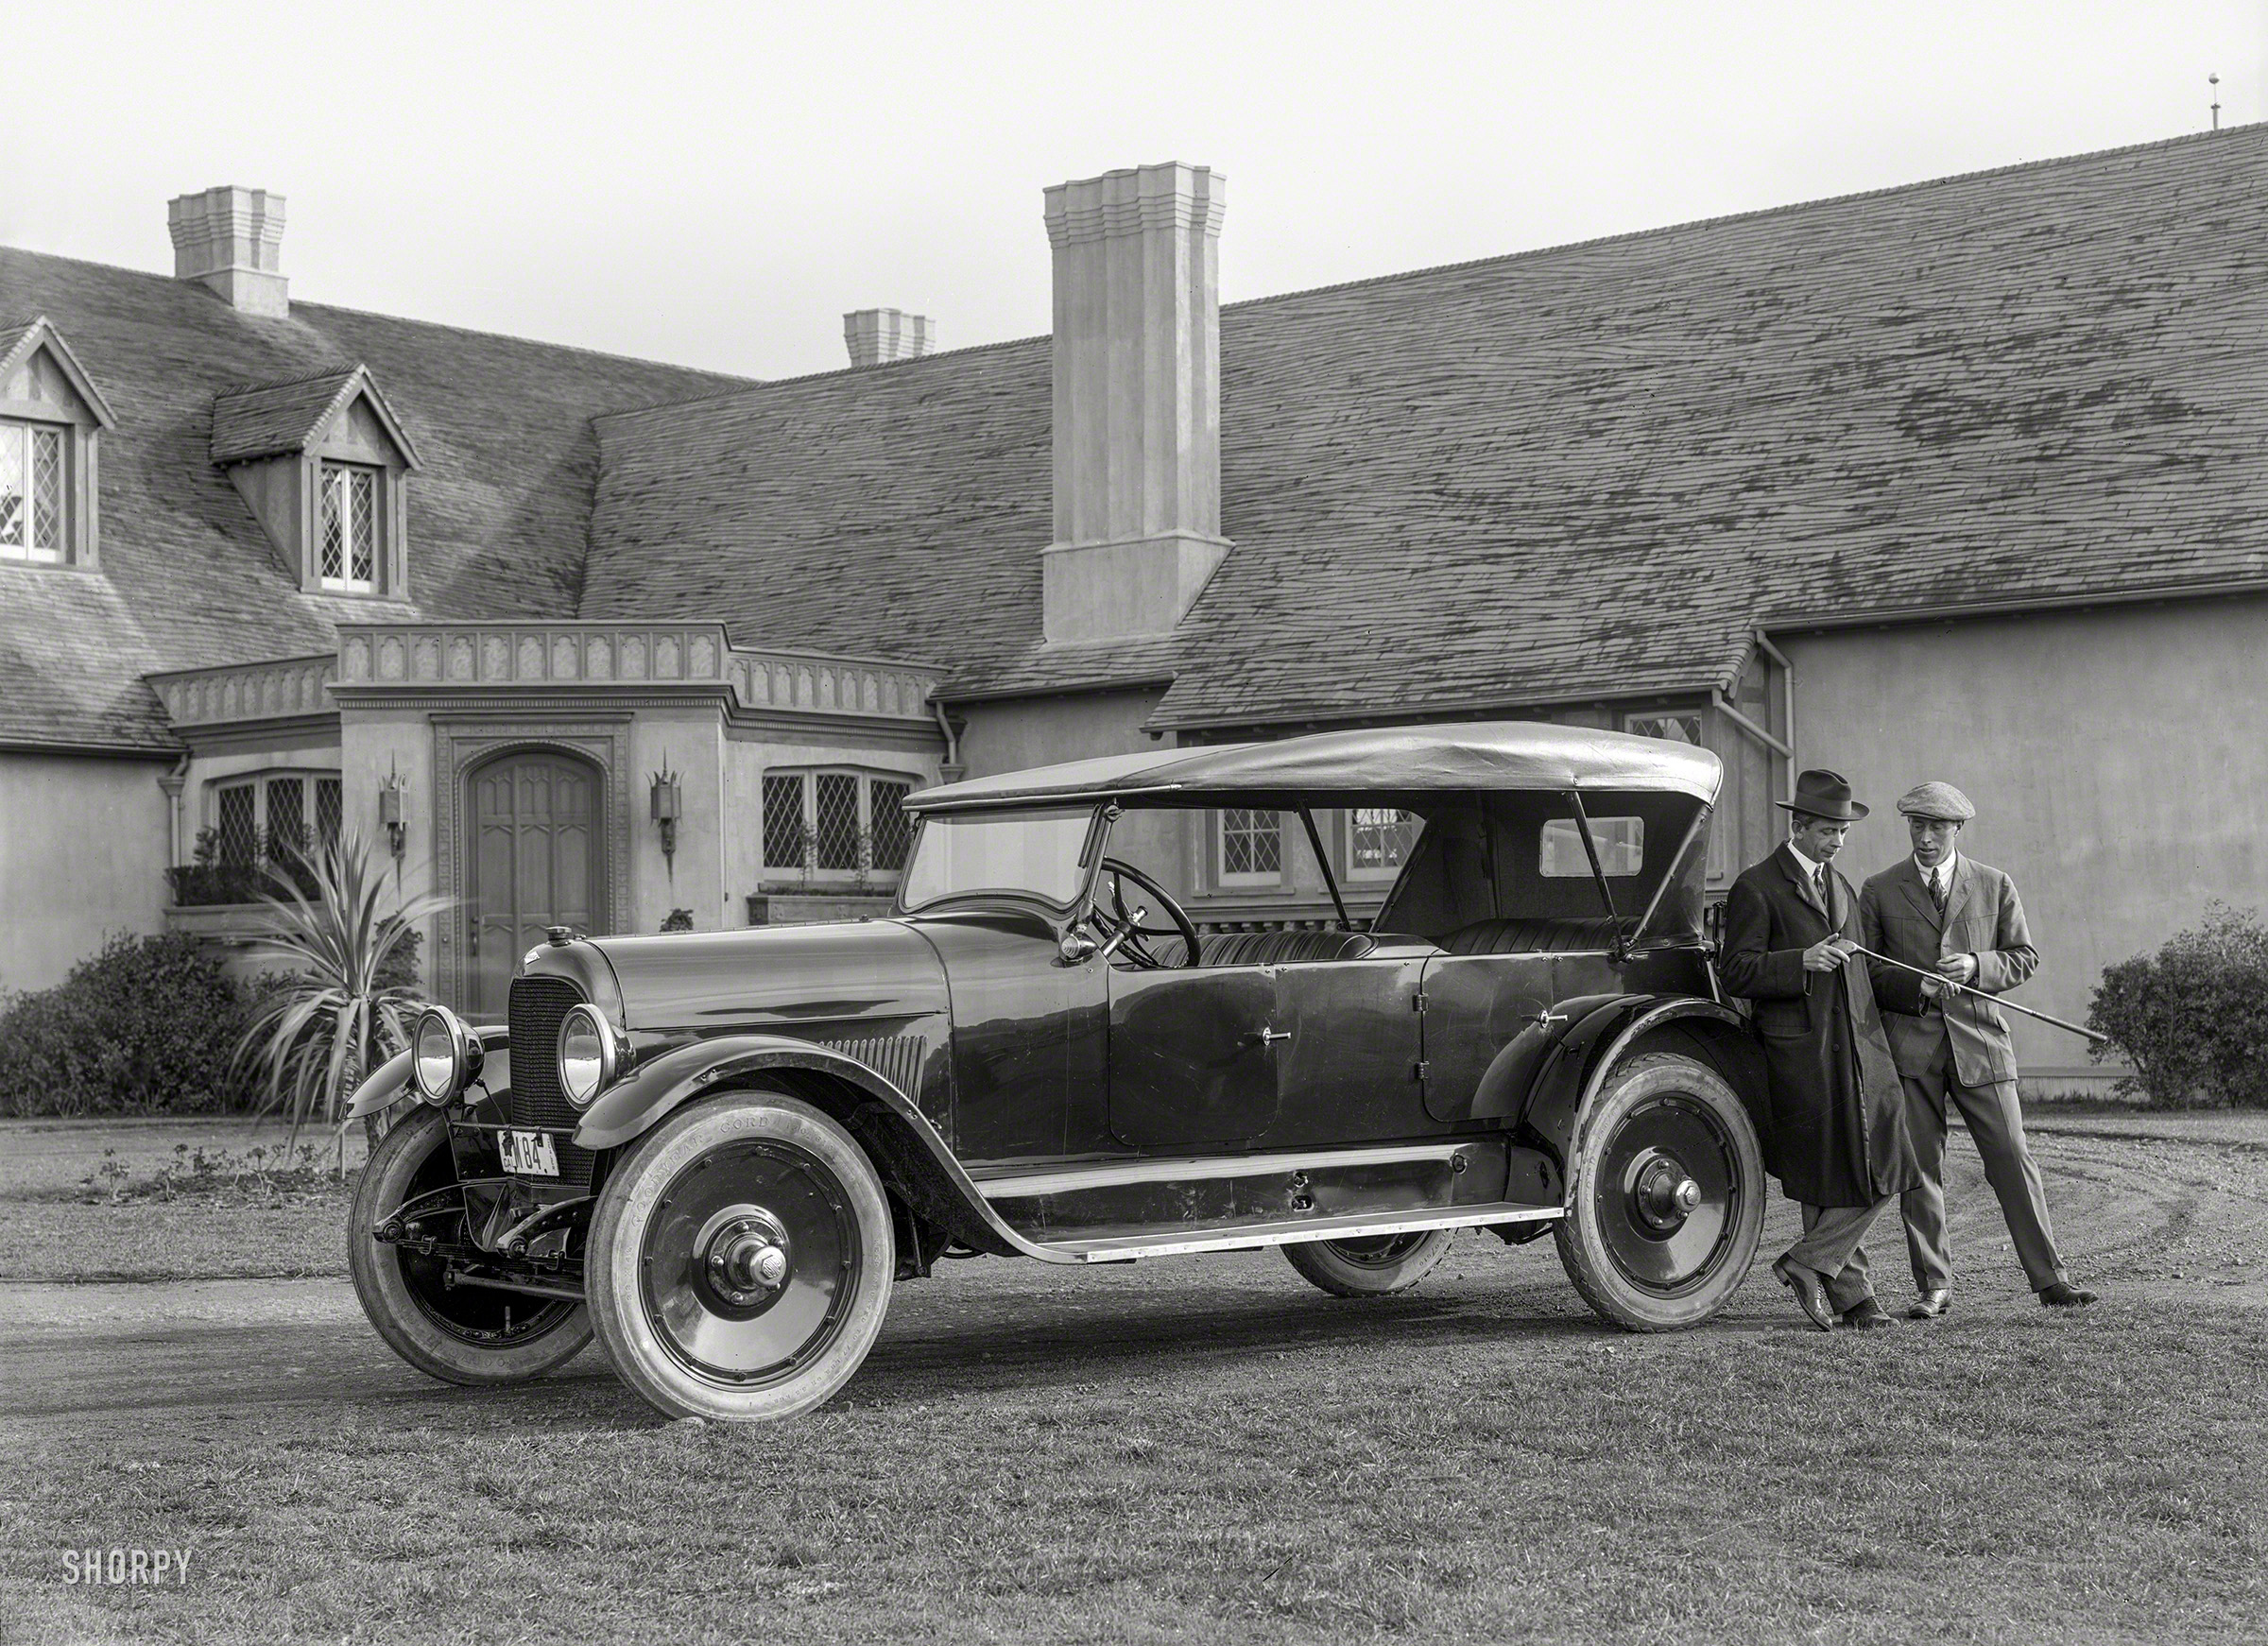 1919. "Paige touring car at San Francisco Golf Club." When a Caddy just isn't enough. 5x7 glass negative by Christopher Helin. View full size.